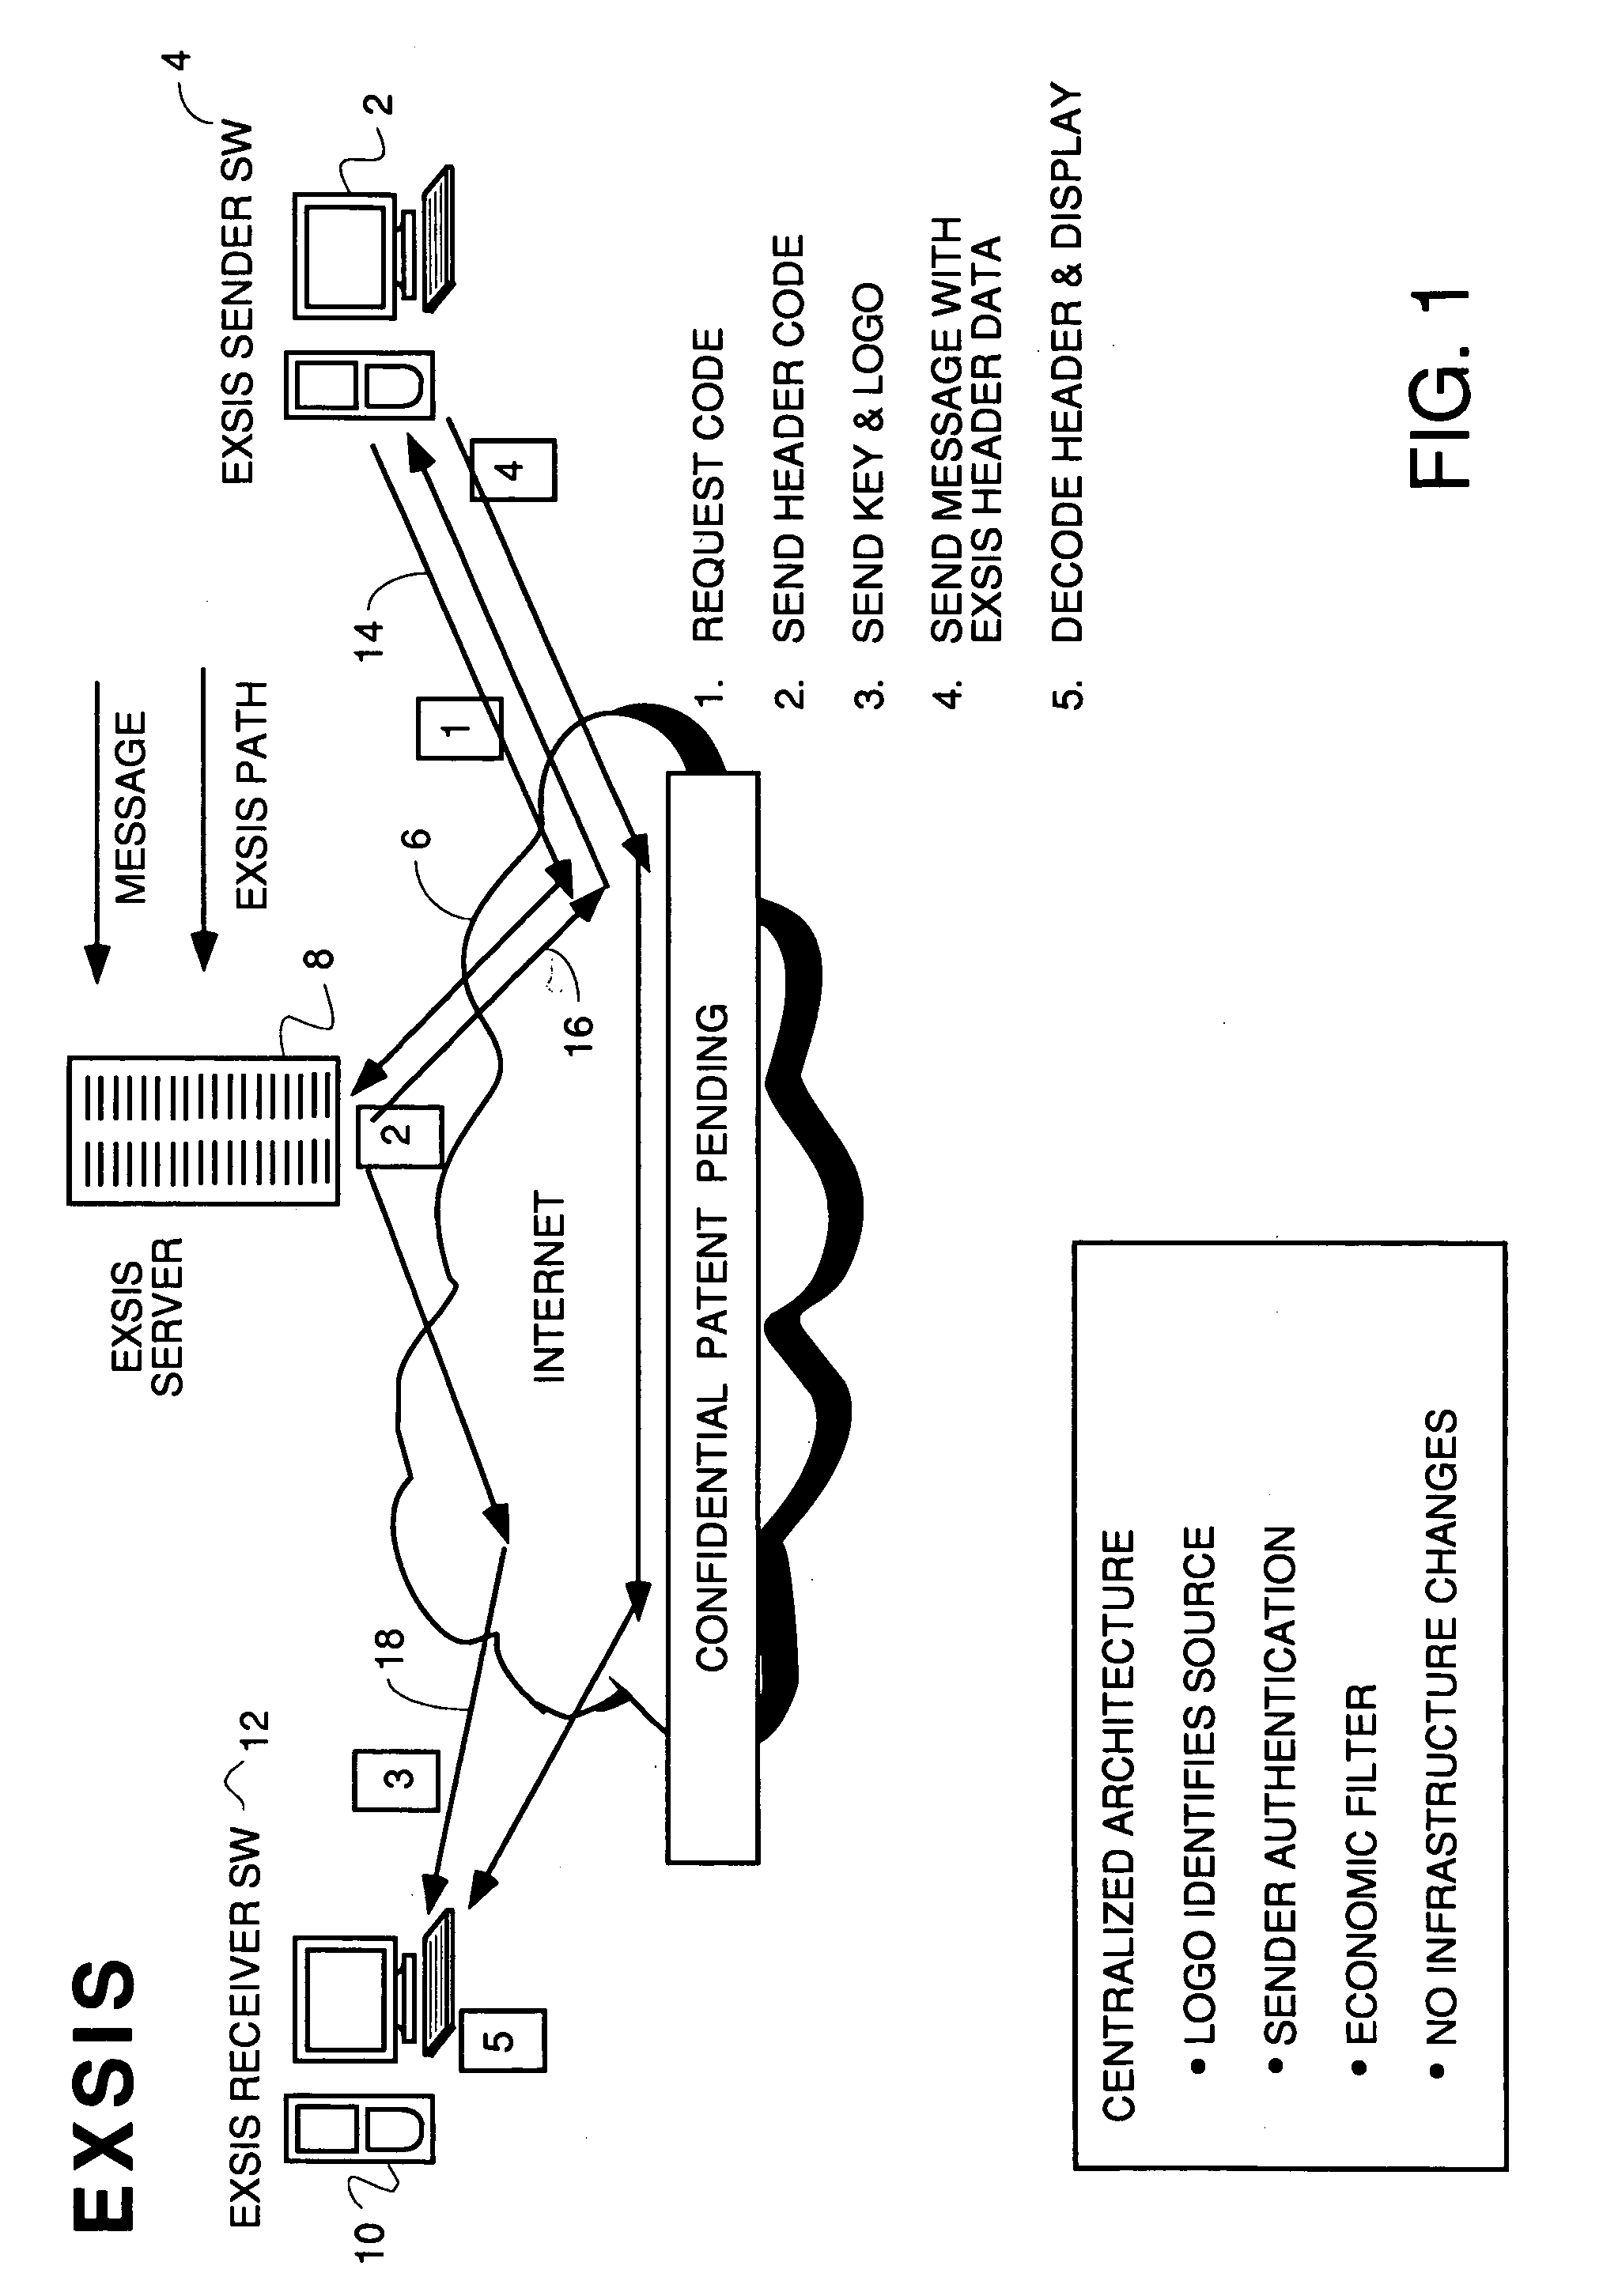 User interface and anti-phishing functions for an anti-spam micropayments system